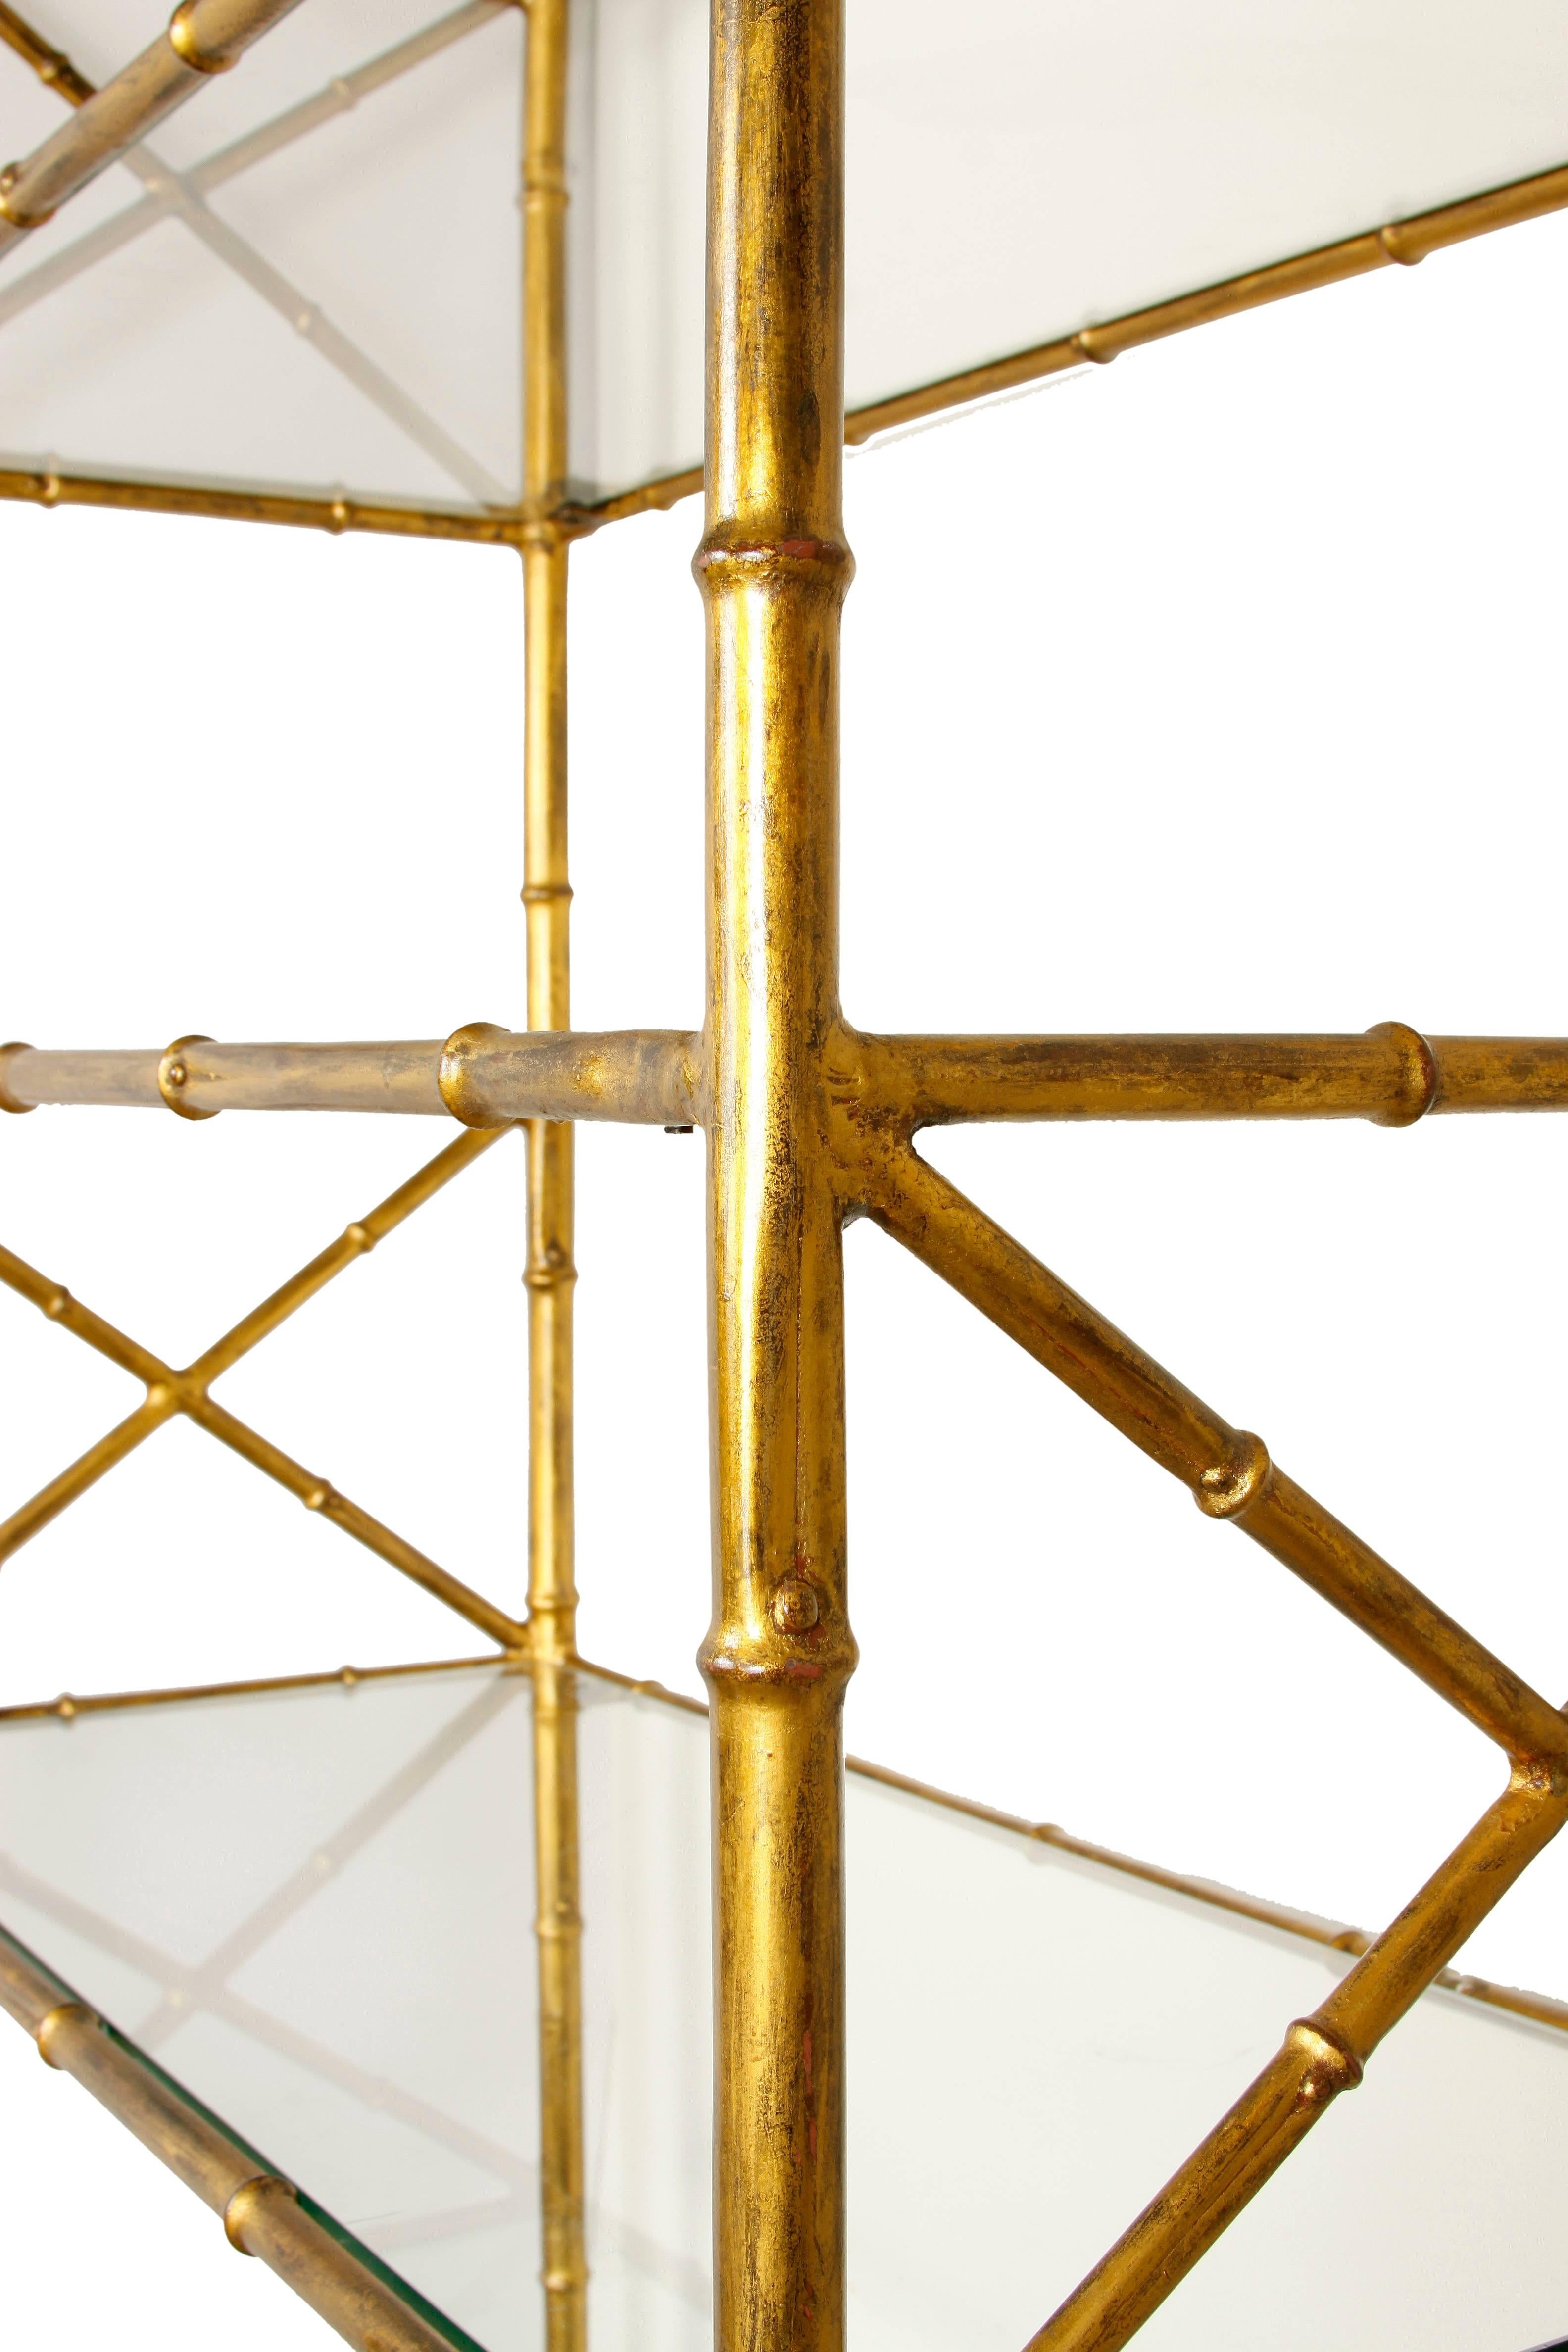 A nice looking and versatile pair of gilt metal faux bamboo étagères with glass shelves. They are in great condition, with lovely detail and x-form design on sides. Perfect for anywhere in the home!

The measurement of the space between each shelf